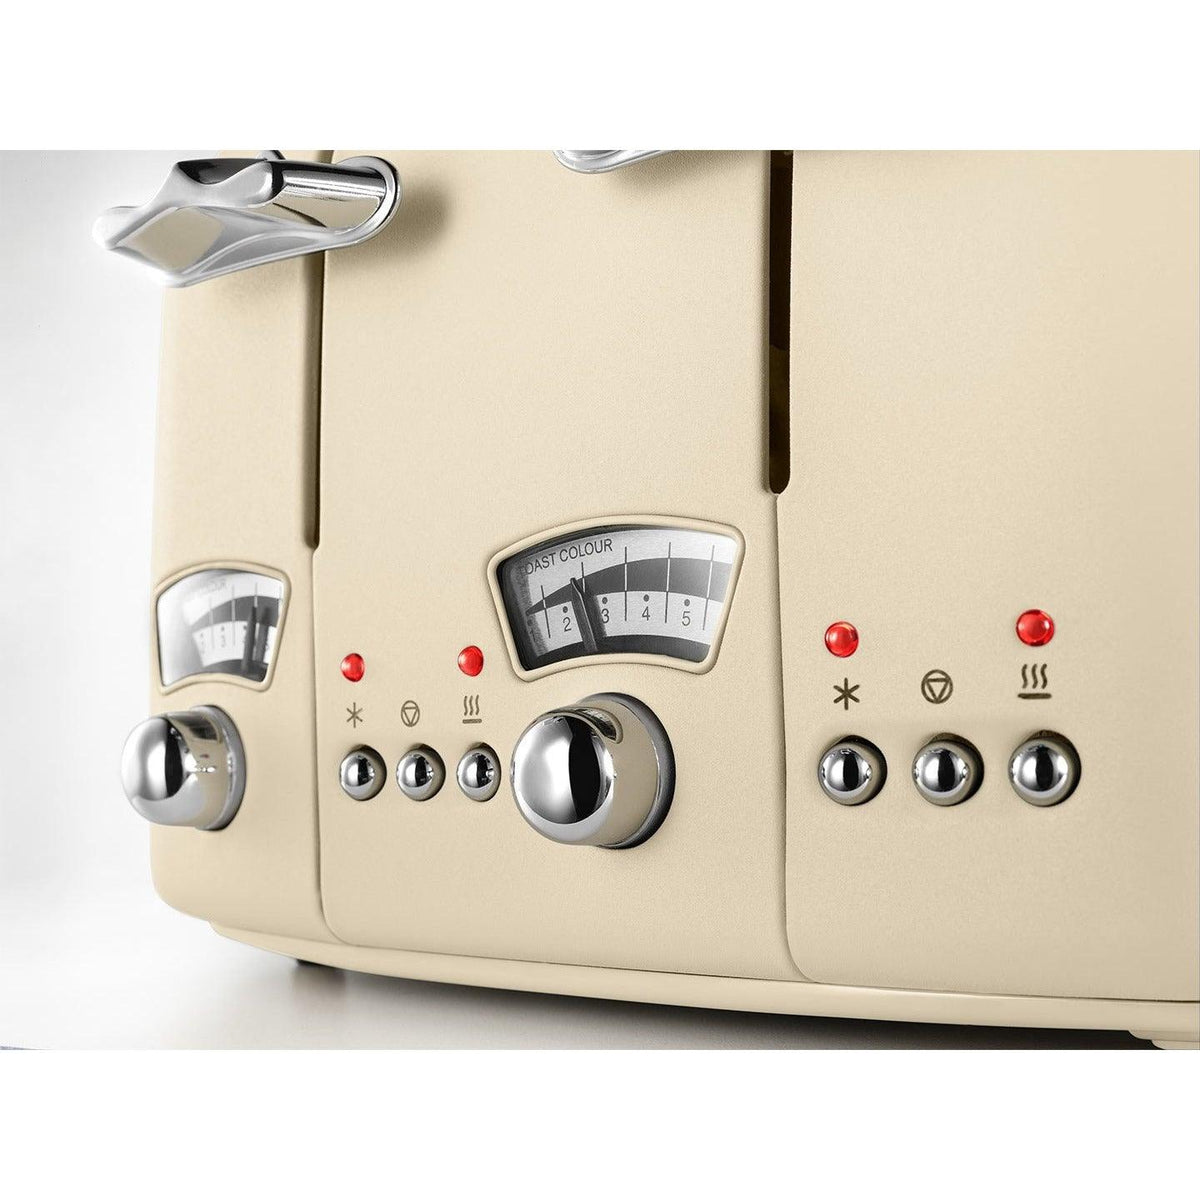 DeLonghi Argento Flora 1800W 4 Slice Toaster - Beige | CT04.BG from DID Electrical - guaranteed Irish, guaranteed quality service. (6890772365500)